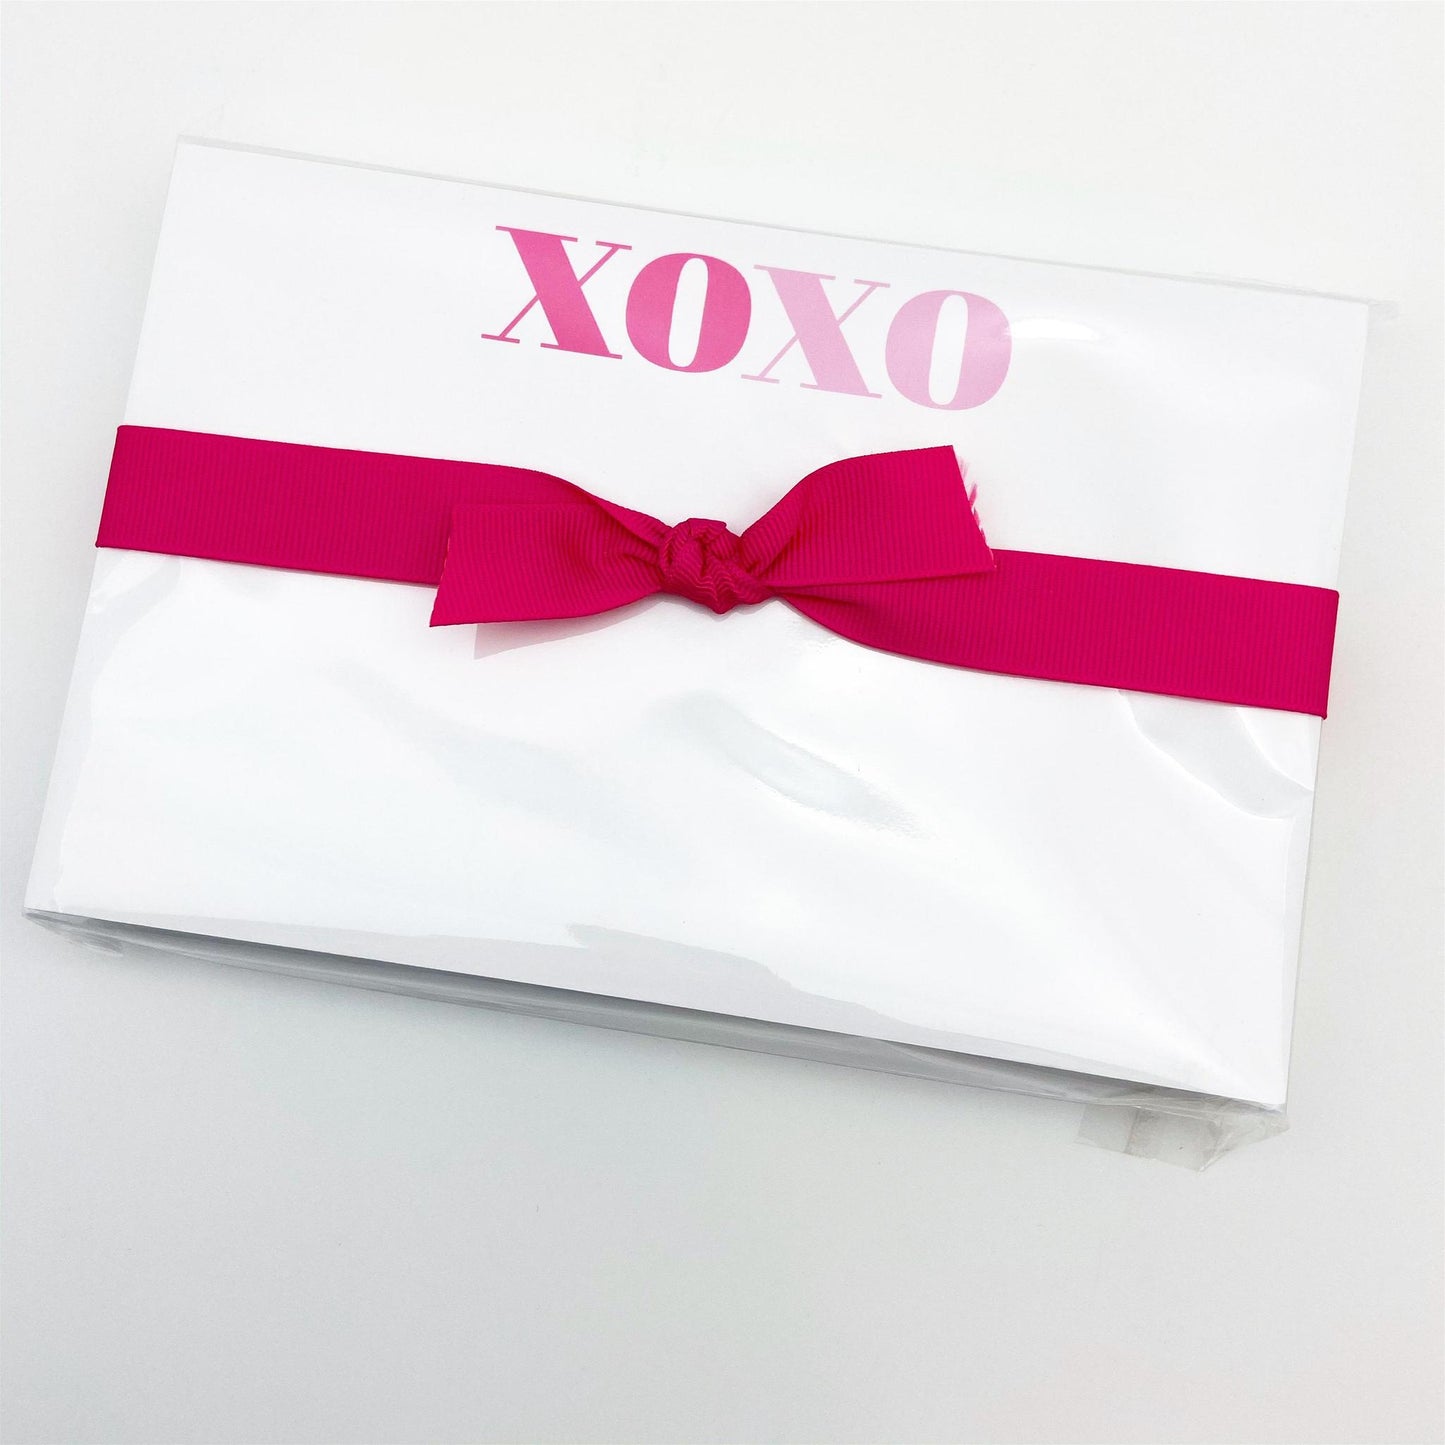 Note Pads - Chunky Pads - XOXO & LOVE NOTE